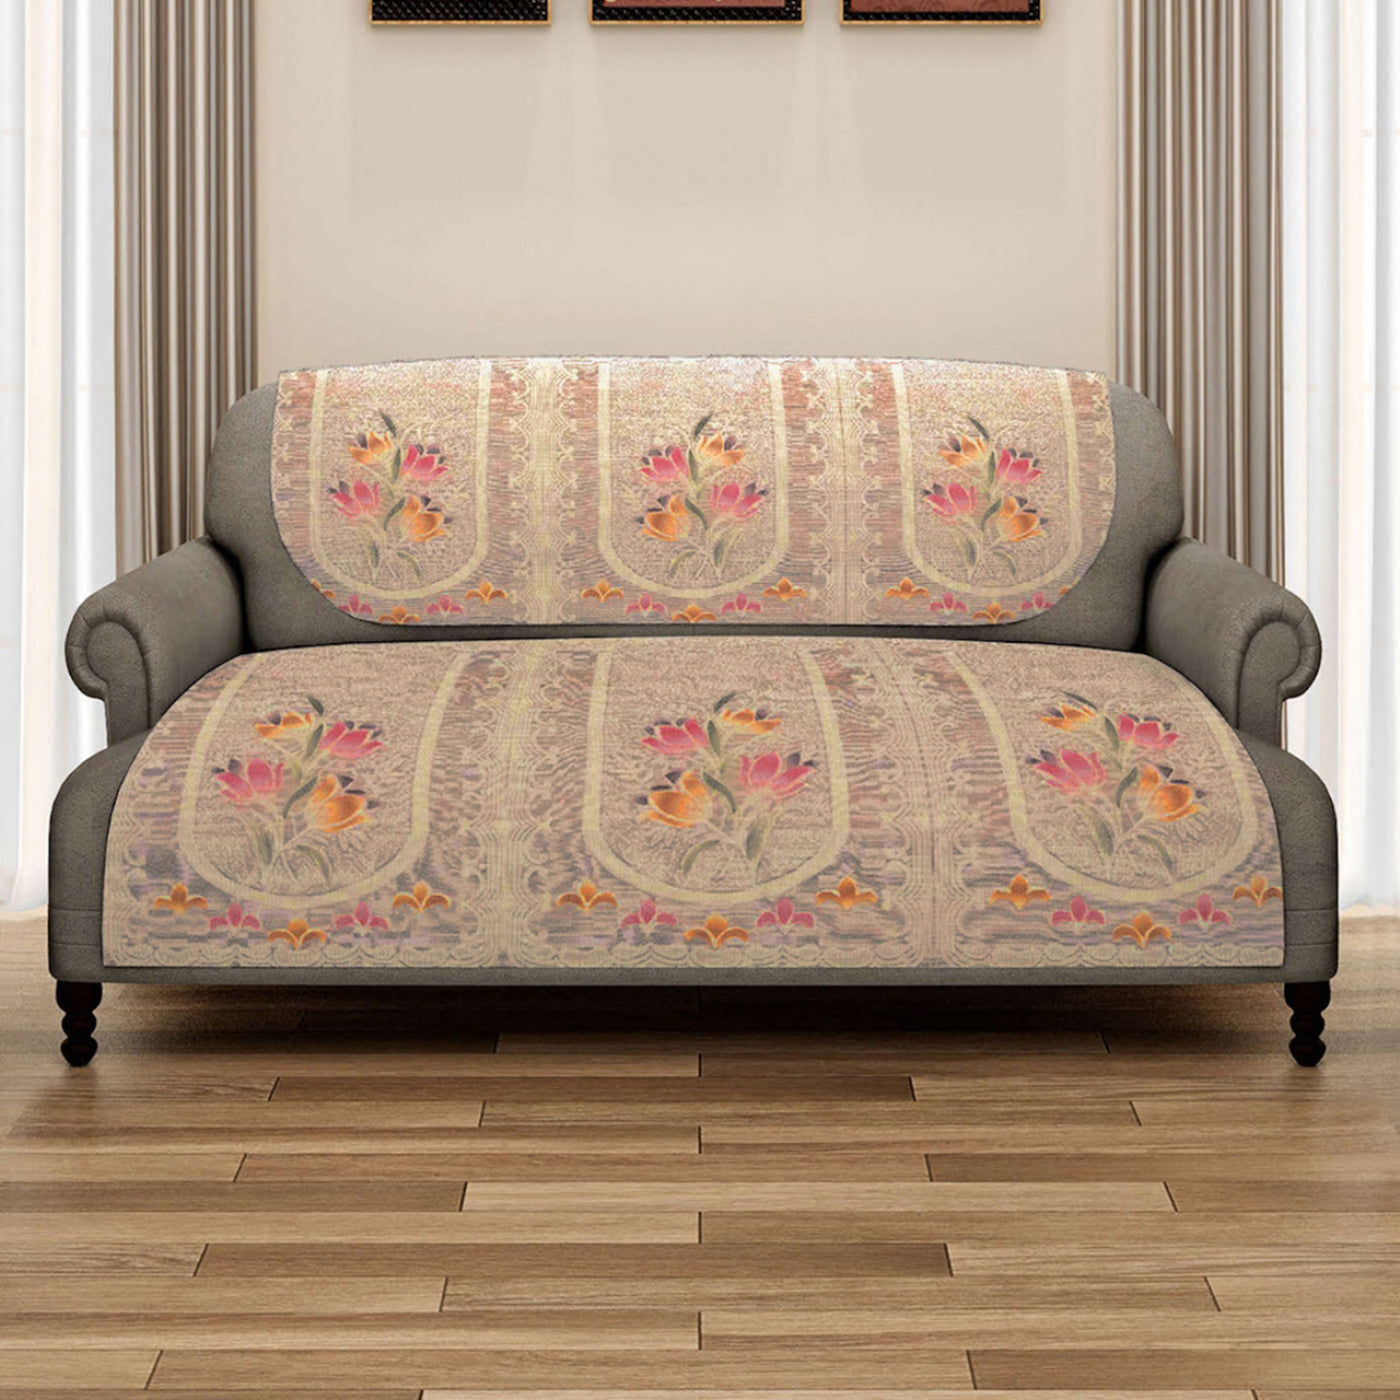 Romee 6-pieces beige floral patterned 5-seater sofa covers slpss74